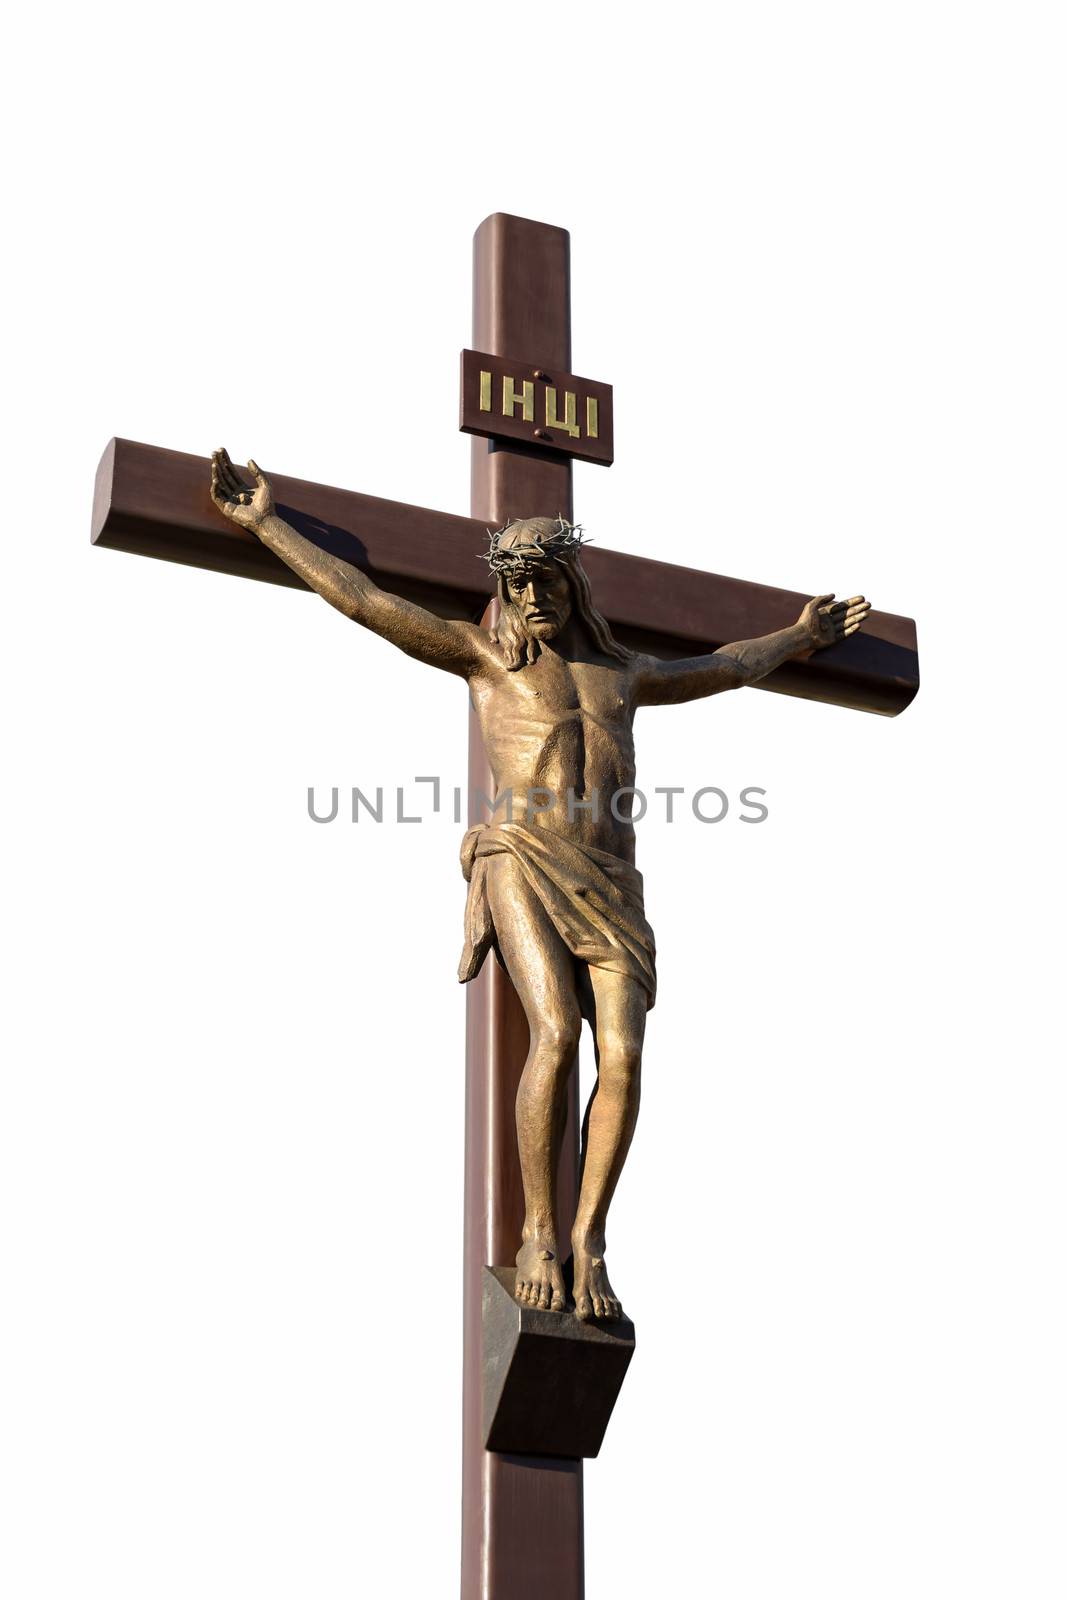 Statue of the crucifixion. Isolated on white background.